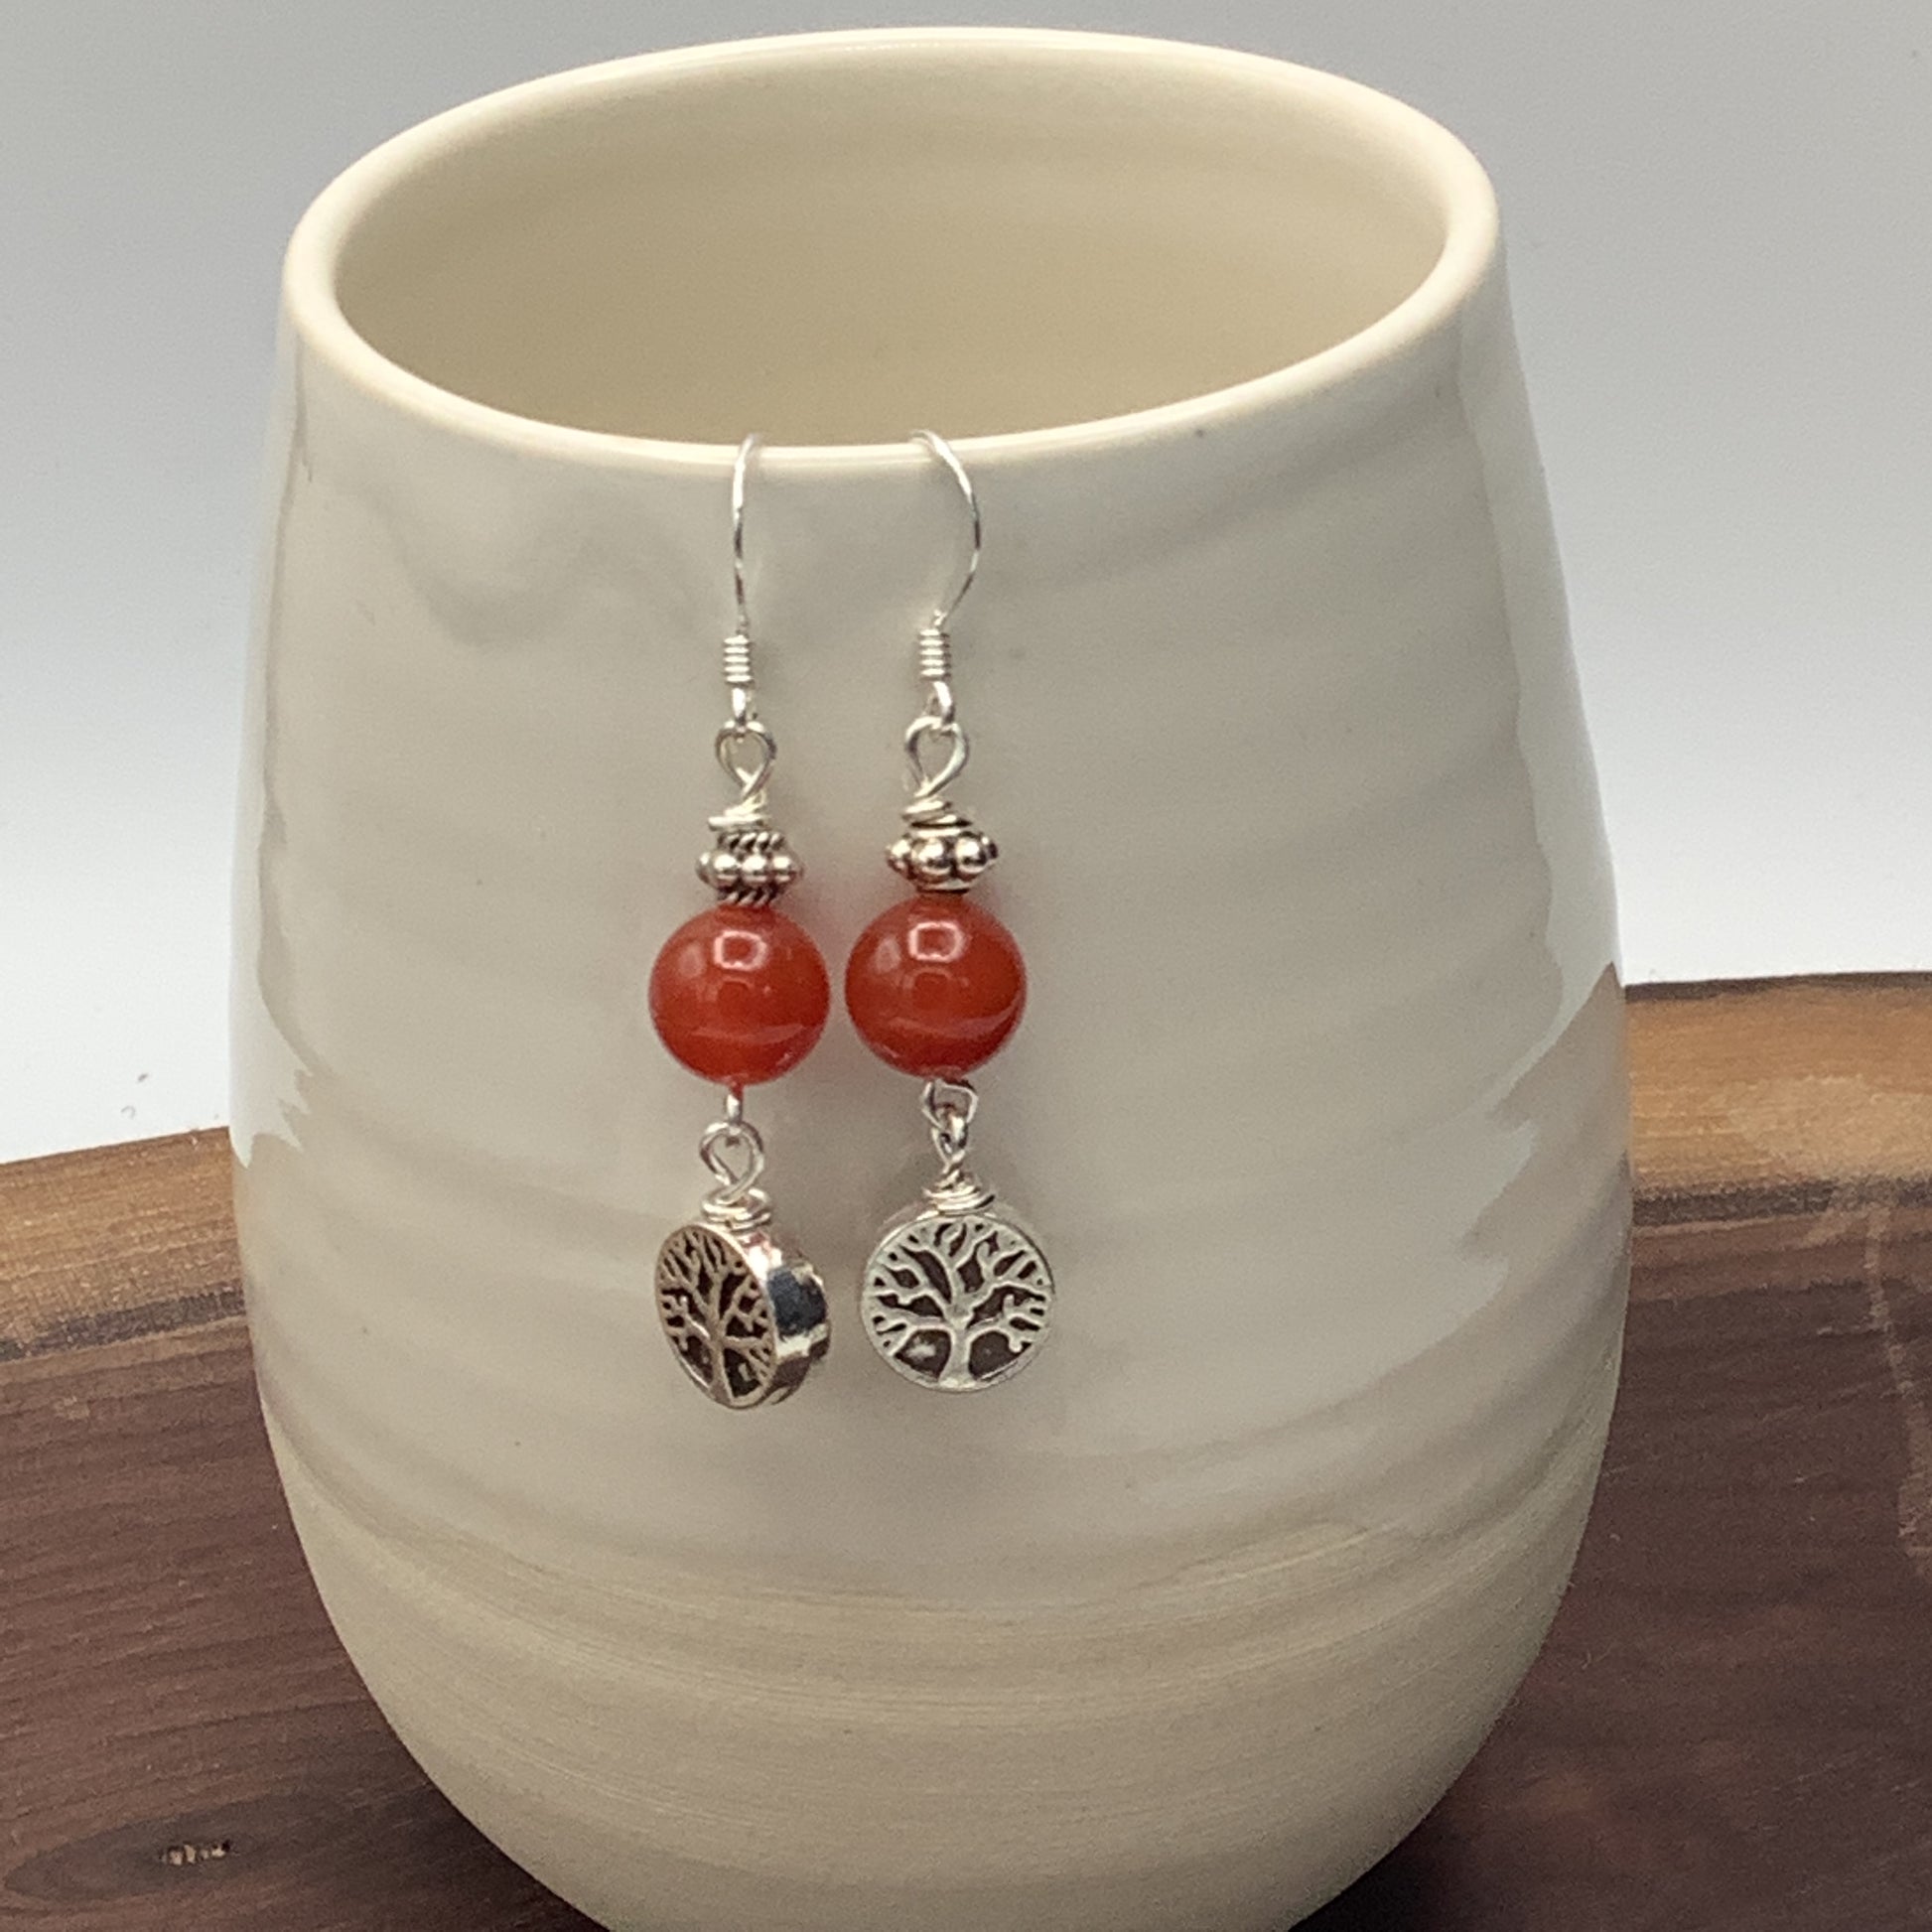 Carnelian earrings with Tree of Life and Sterling Silver Earwire